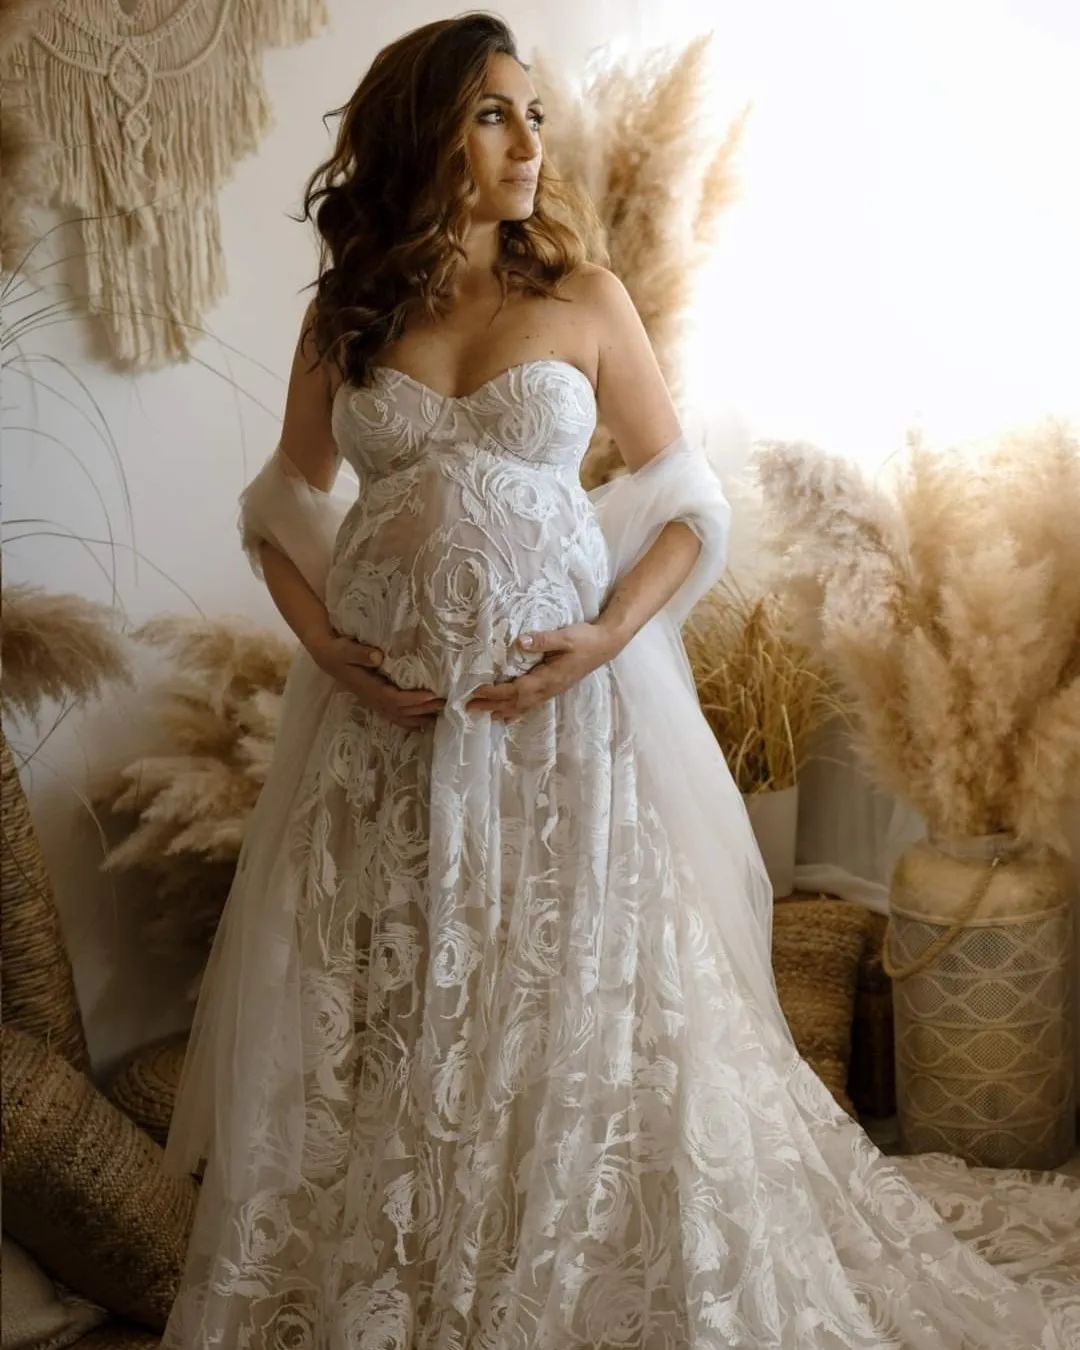 White Rose Gown - maternity photoshoot dress